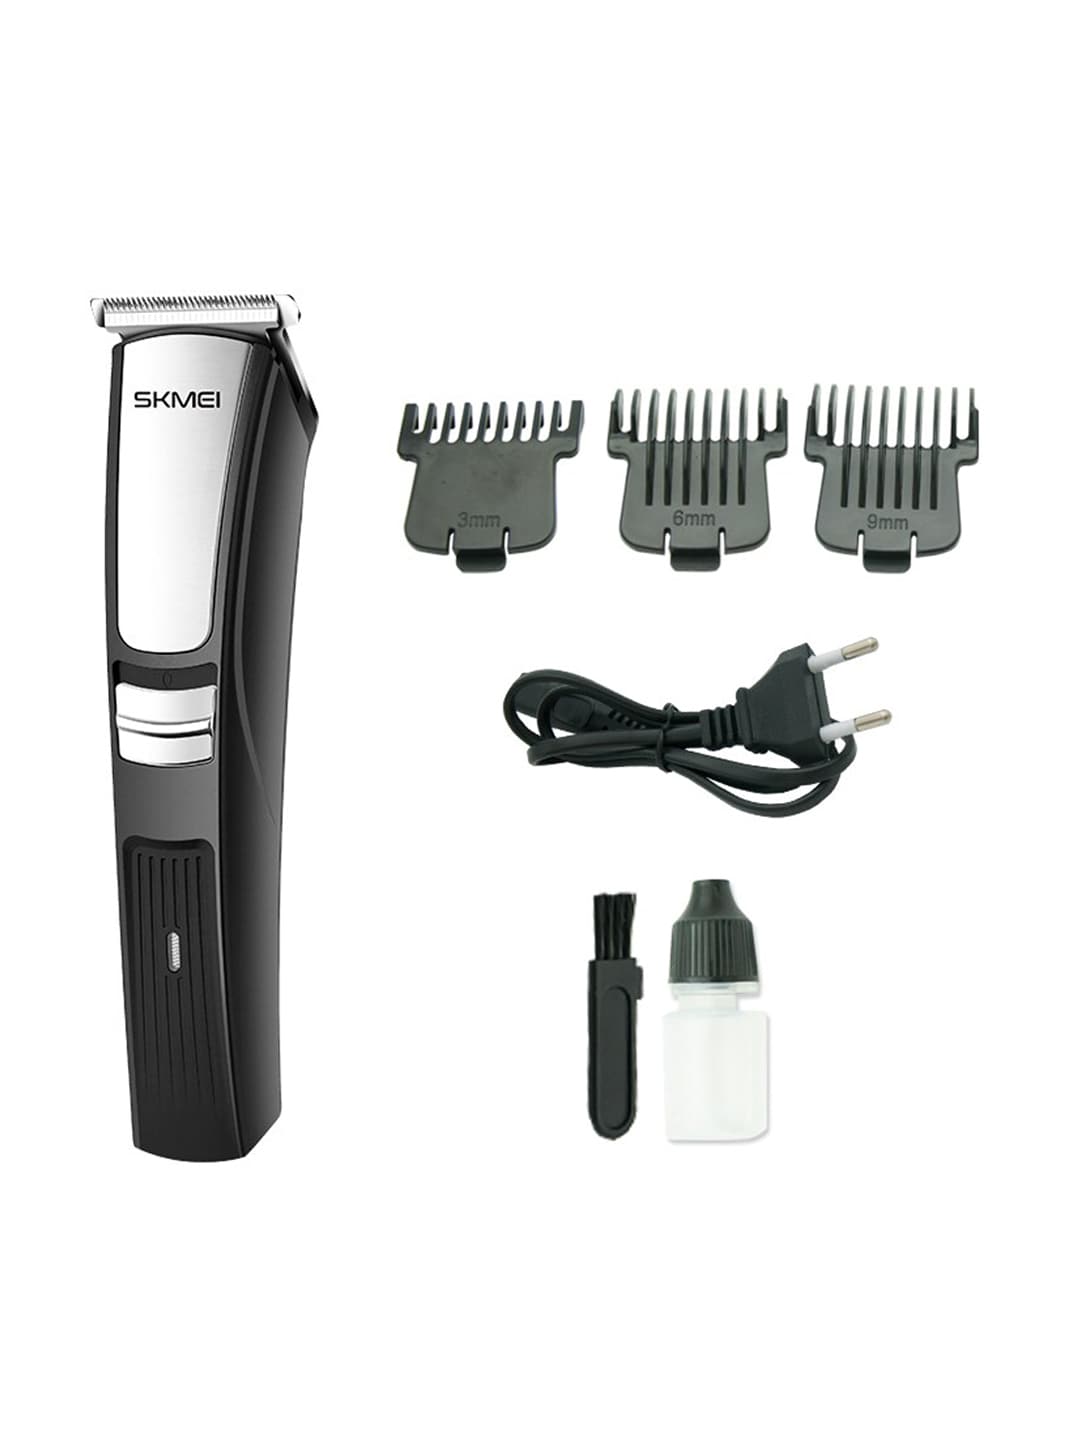 Skmei Black Sk-1016 Modern Classy Rechargeable Hair Trimmer for Men Price in India